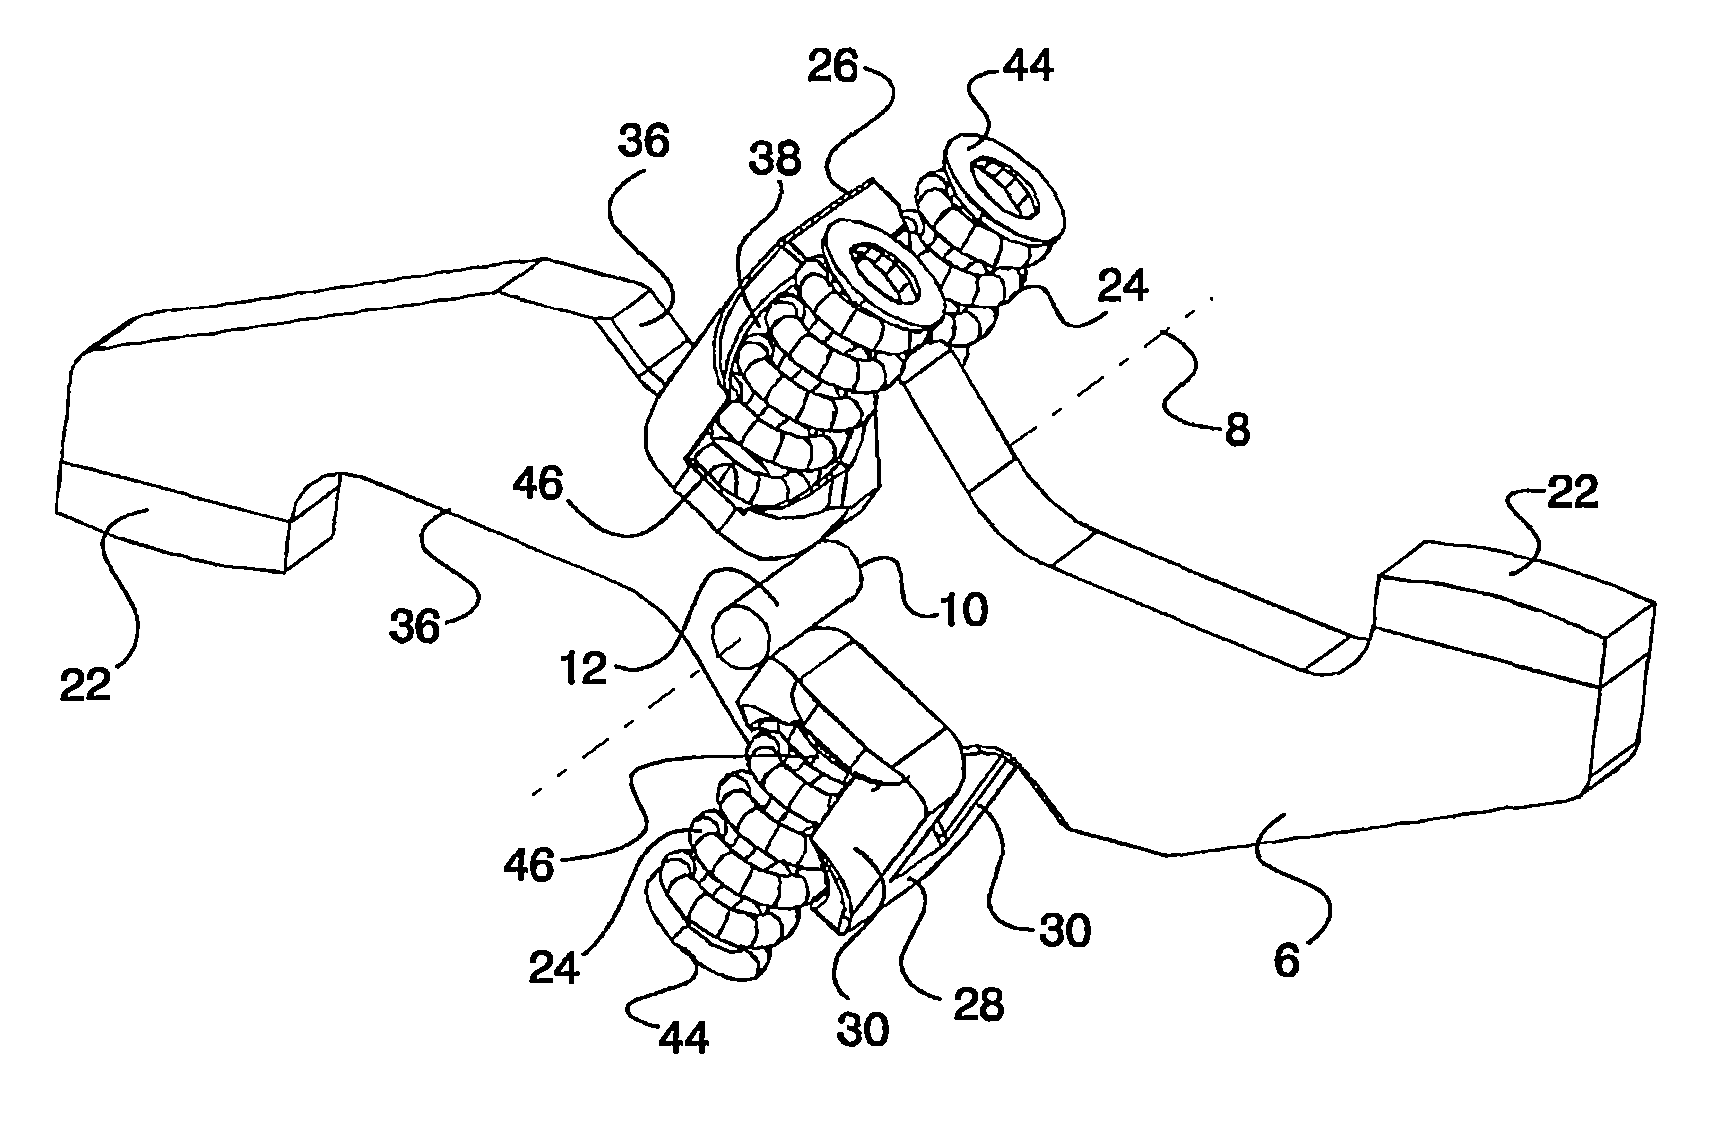 Electrodynamically tilting contact system for power circuit breakers